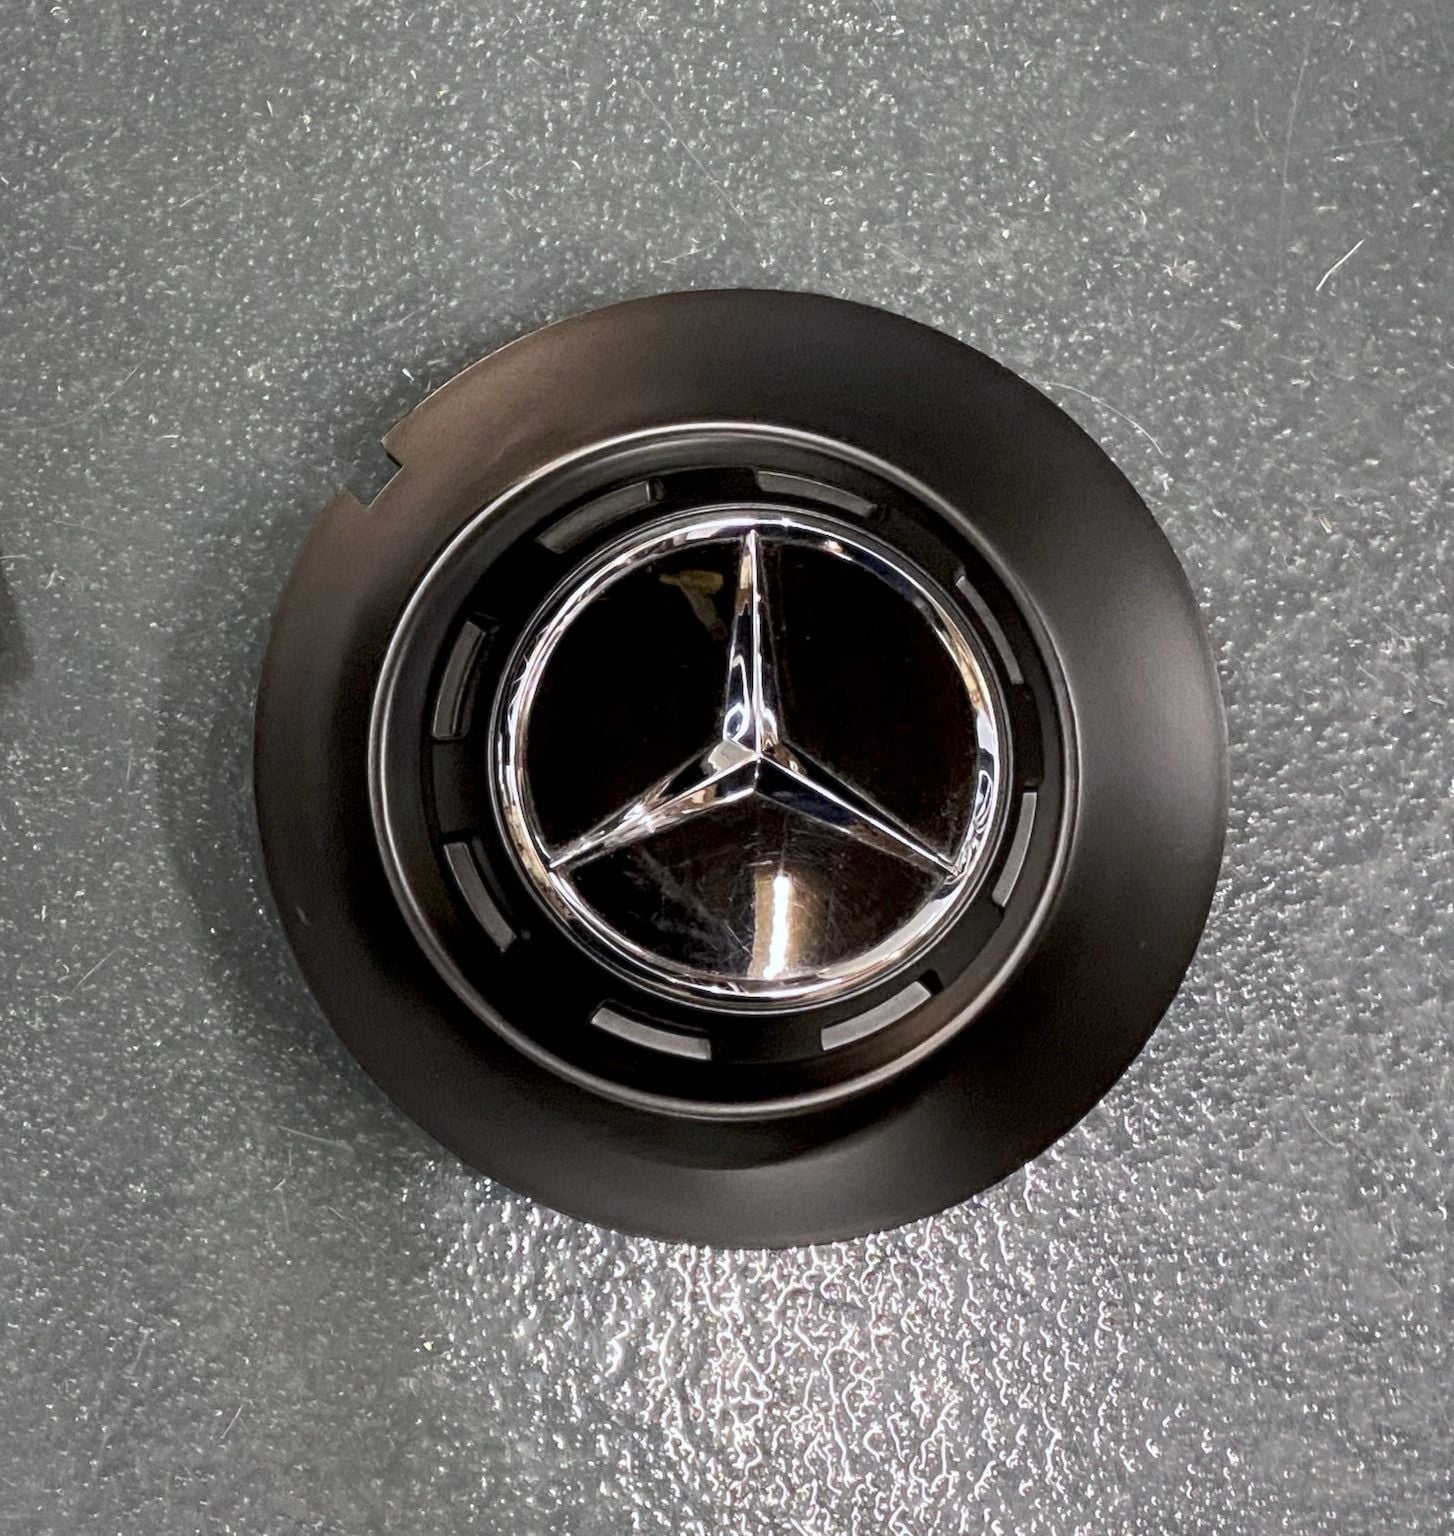 Wheels and Tires/Axles - AMG C63 S 19" Cross-Spoke Wheels + Like-New Winter Tires - Used - 2016 to 2021 Mercedes-Benz C63 AMG S - Vancouver, BC V4M1L8, Canada